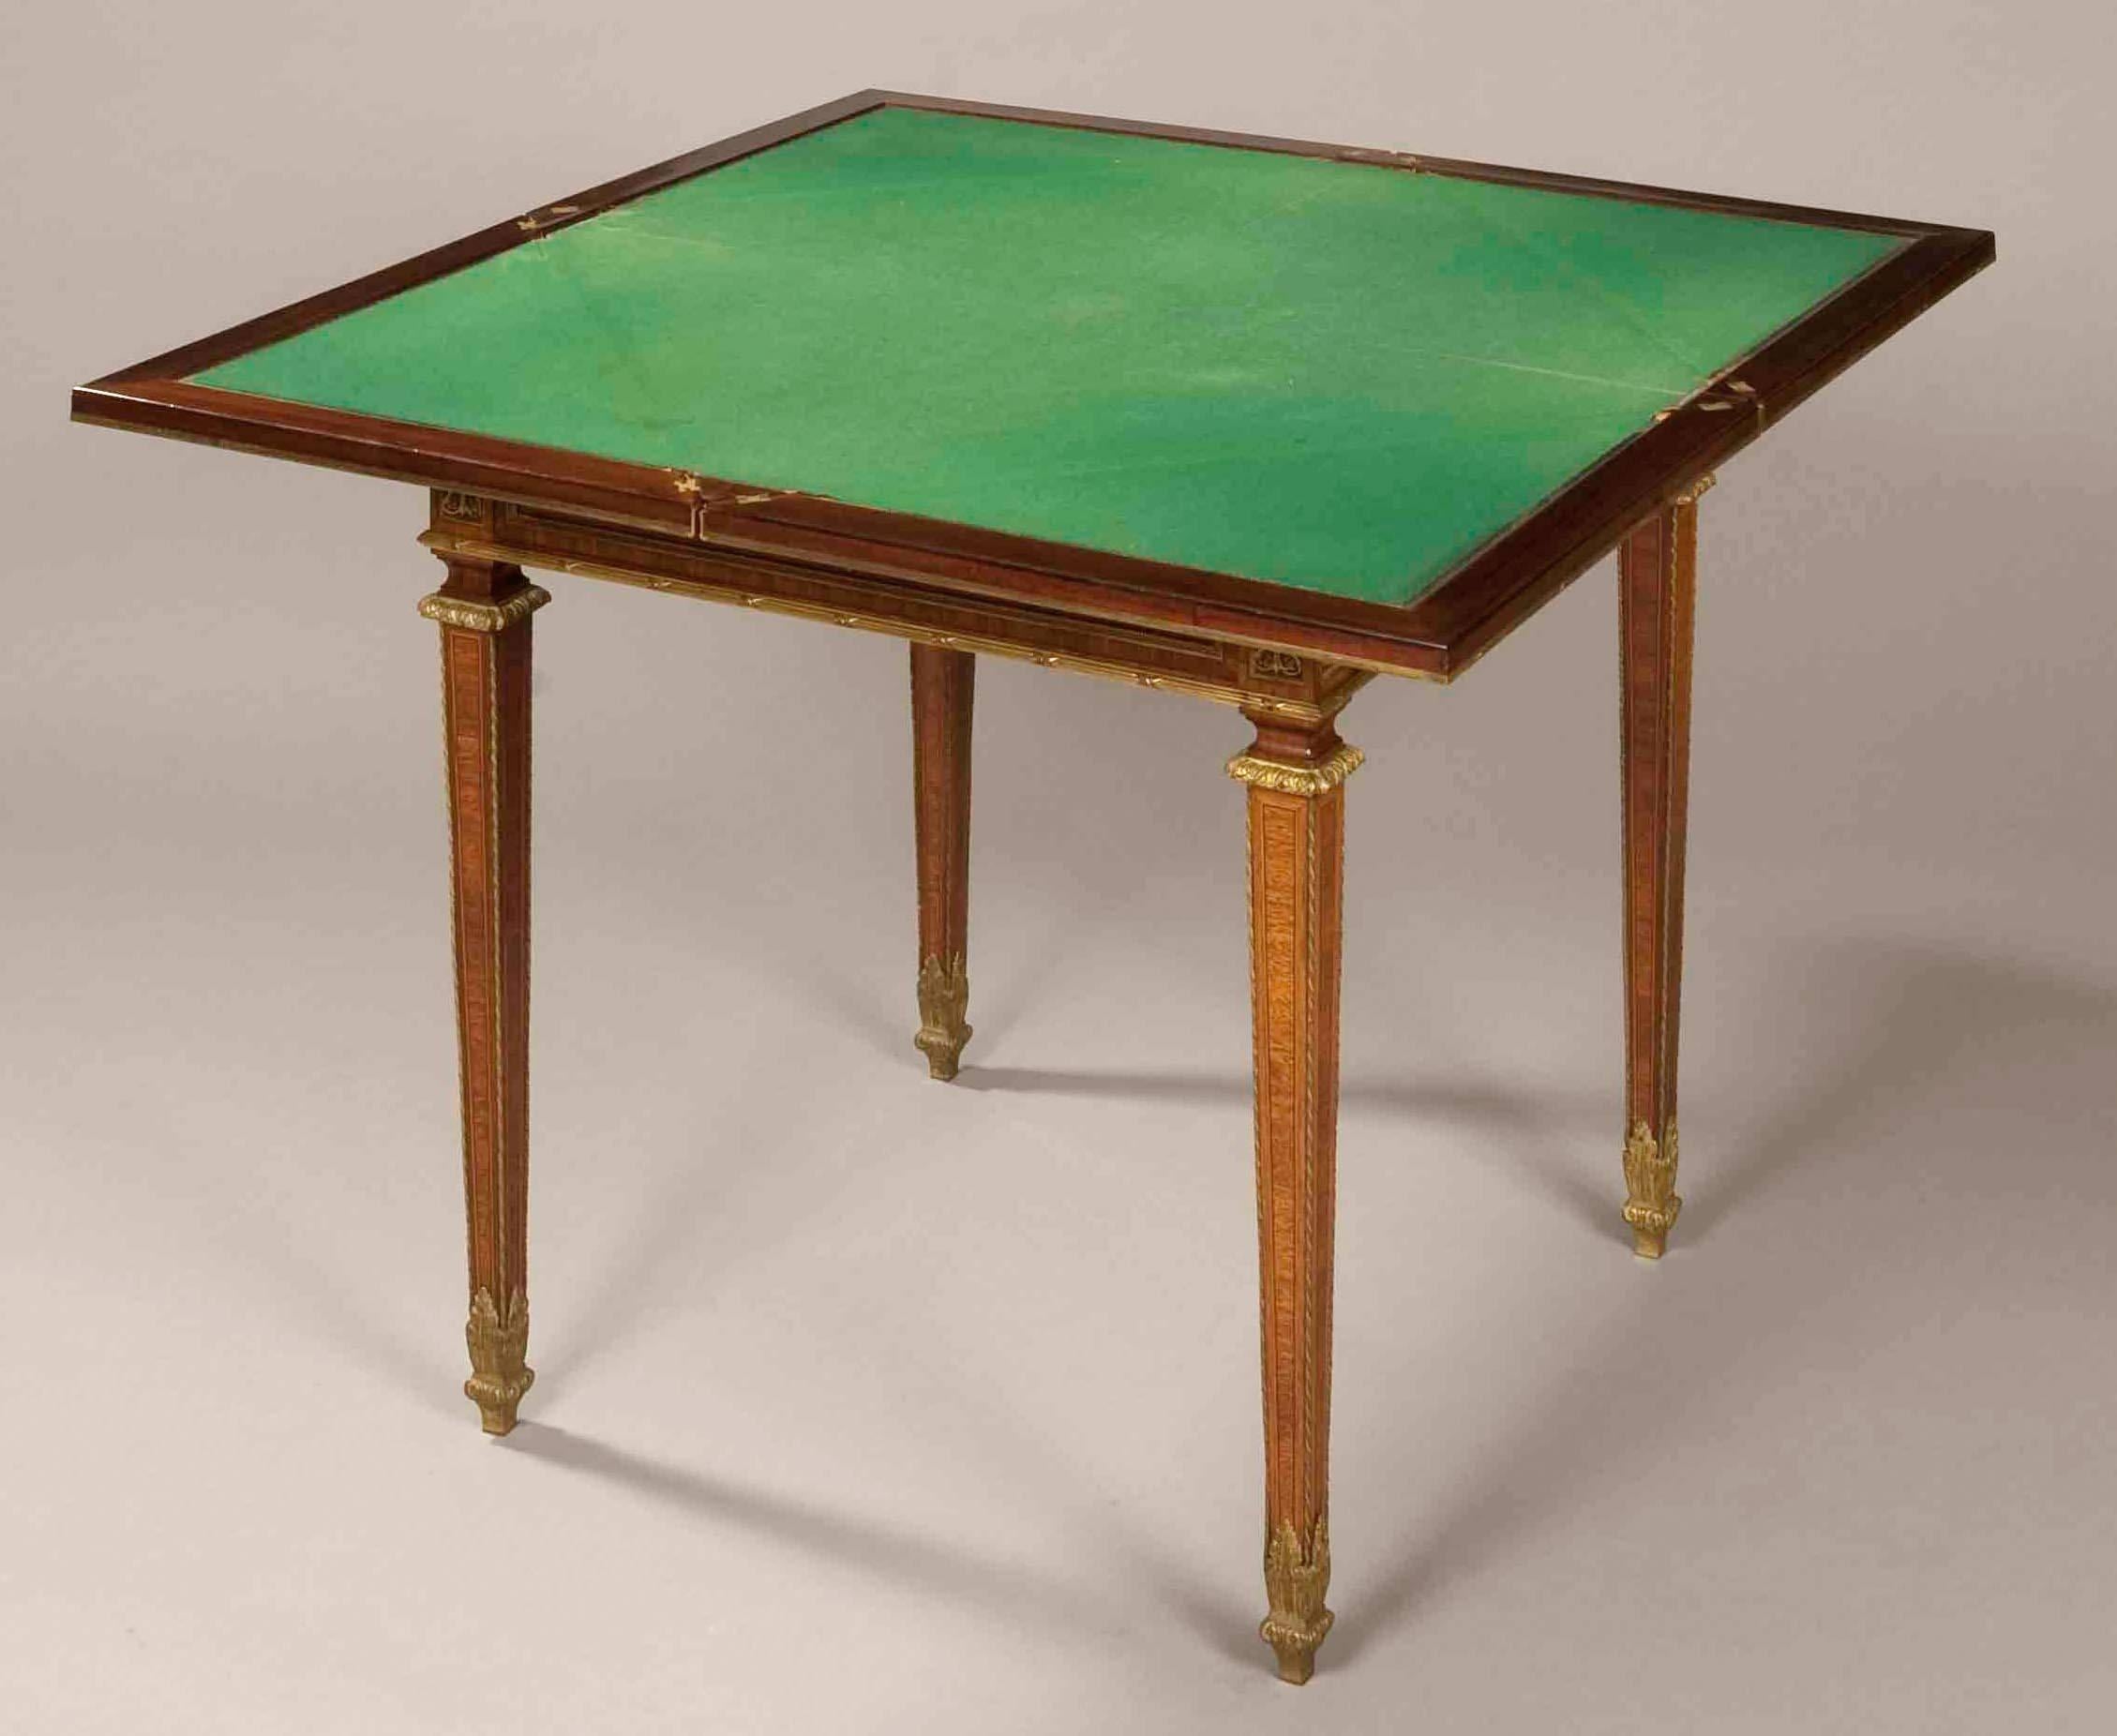 A fine card table in the Louis XVI manner.

Constructed in kingwood with purpleheart crossbanding, and dressed with superbly cast and chased mercury gilt bronze mounts; rising from tapering legs, with bronze sabots cast as leaves and atop, an